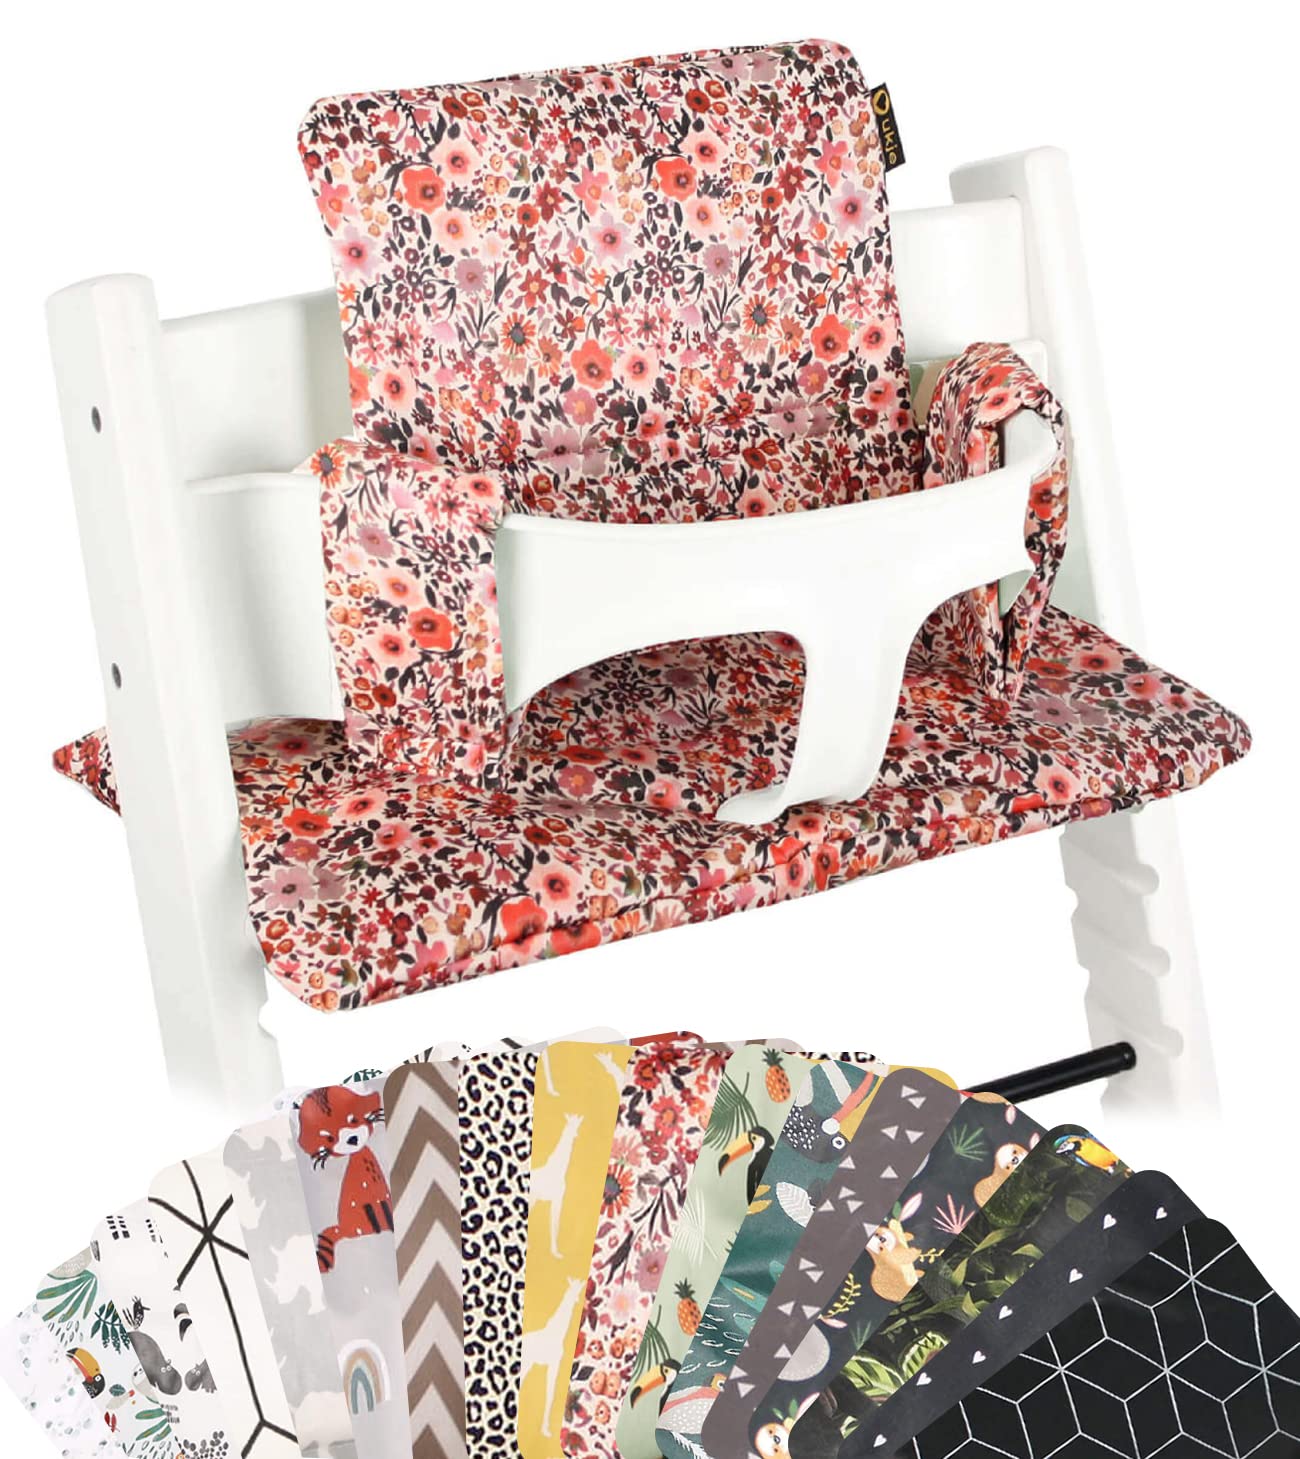 Ukje Seat Cushion for Stokke Tripp Trapp High Chair, Many Colours and Patterns, Handmade in Europe, Suitable as Stokke Tripp Trapp Seat Cushion, Washable, Stokke Seat Cushion